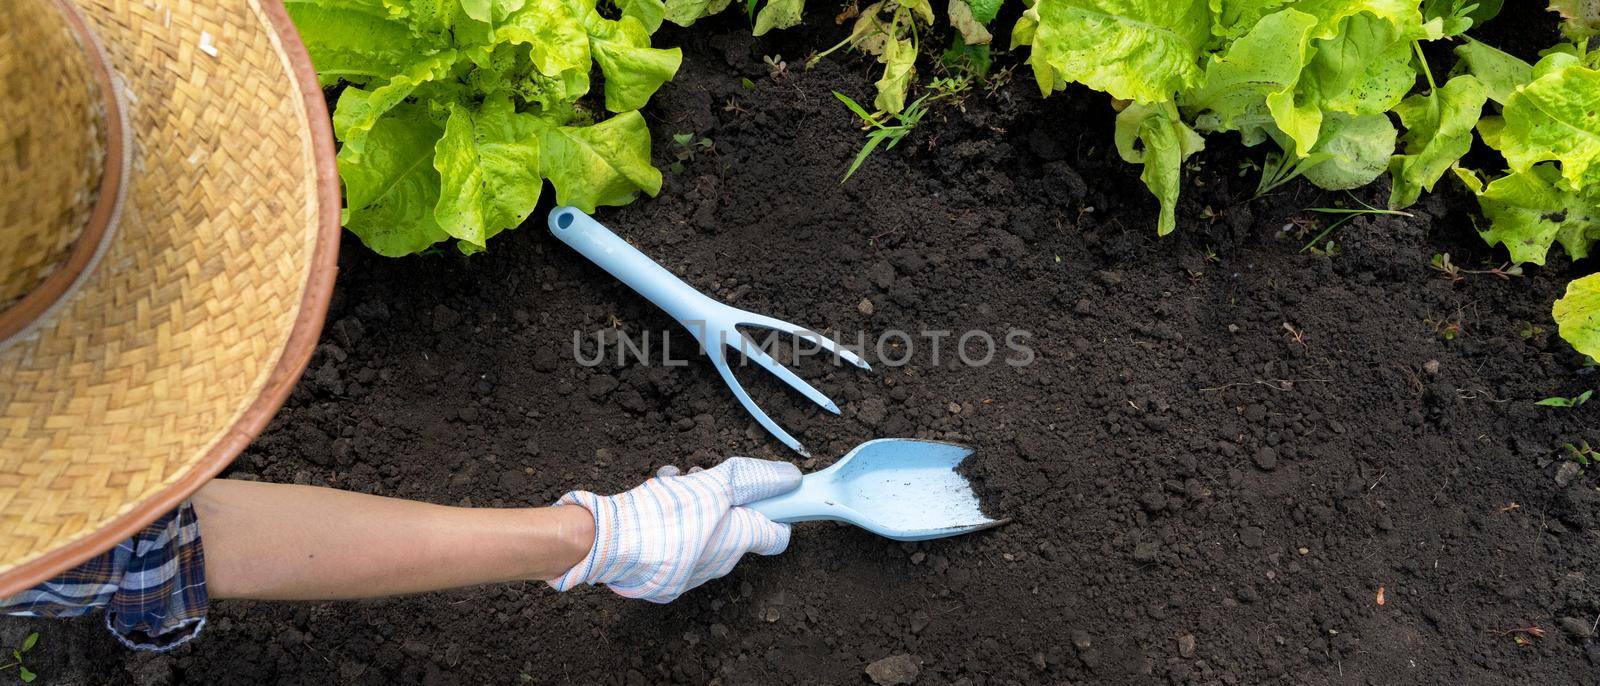 A young girl in a straw hat and gloves prepares the soil in the garden for planting seedlings. The inventory is on the ground: garden trowel and rake, top view.